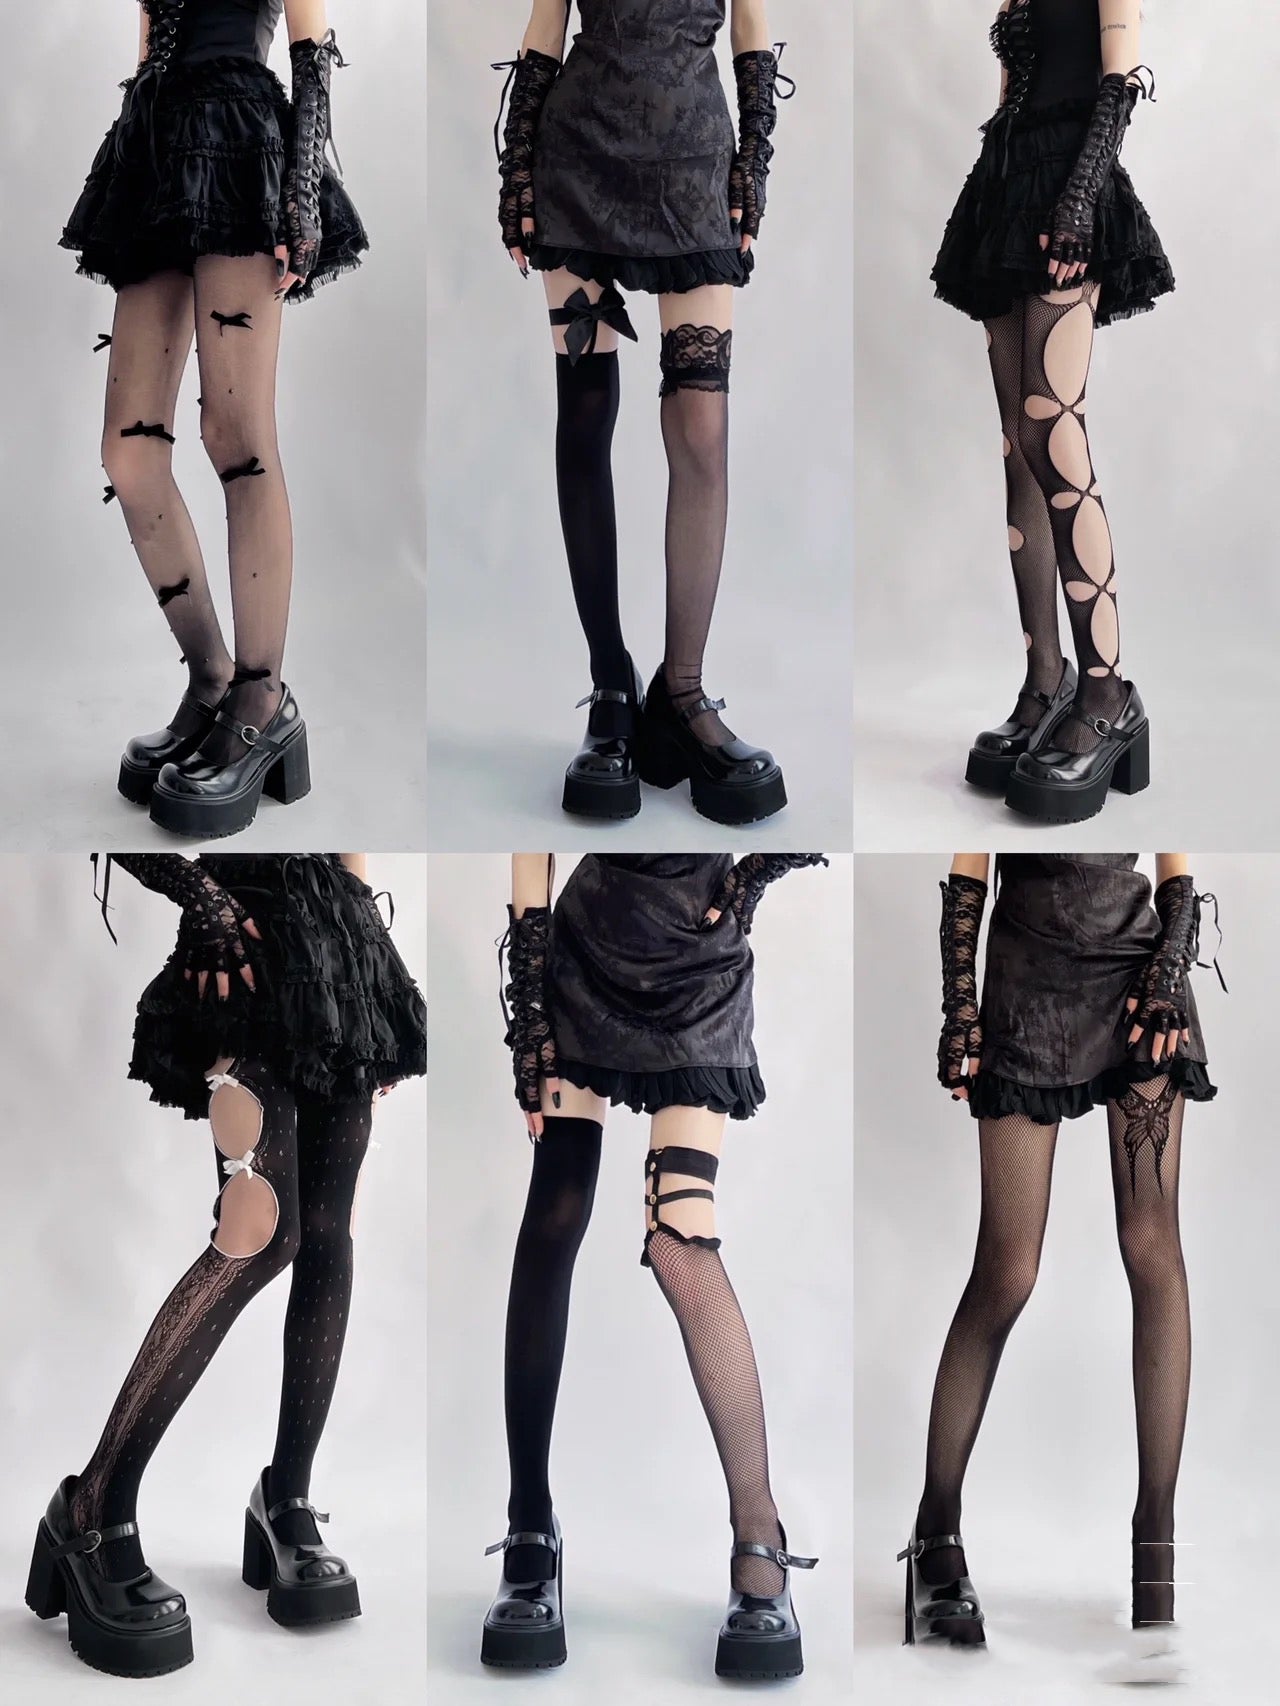 Darkness Revealed: Gothic Hollow-Out Stockings